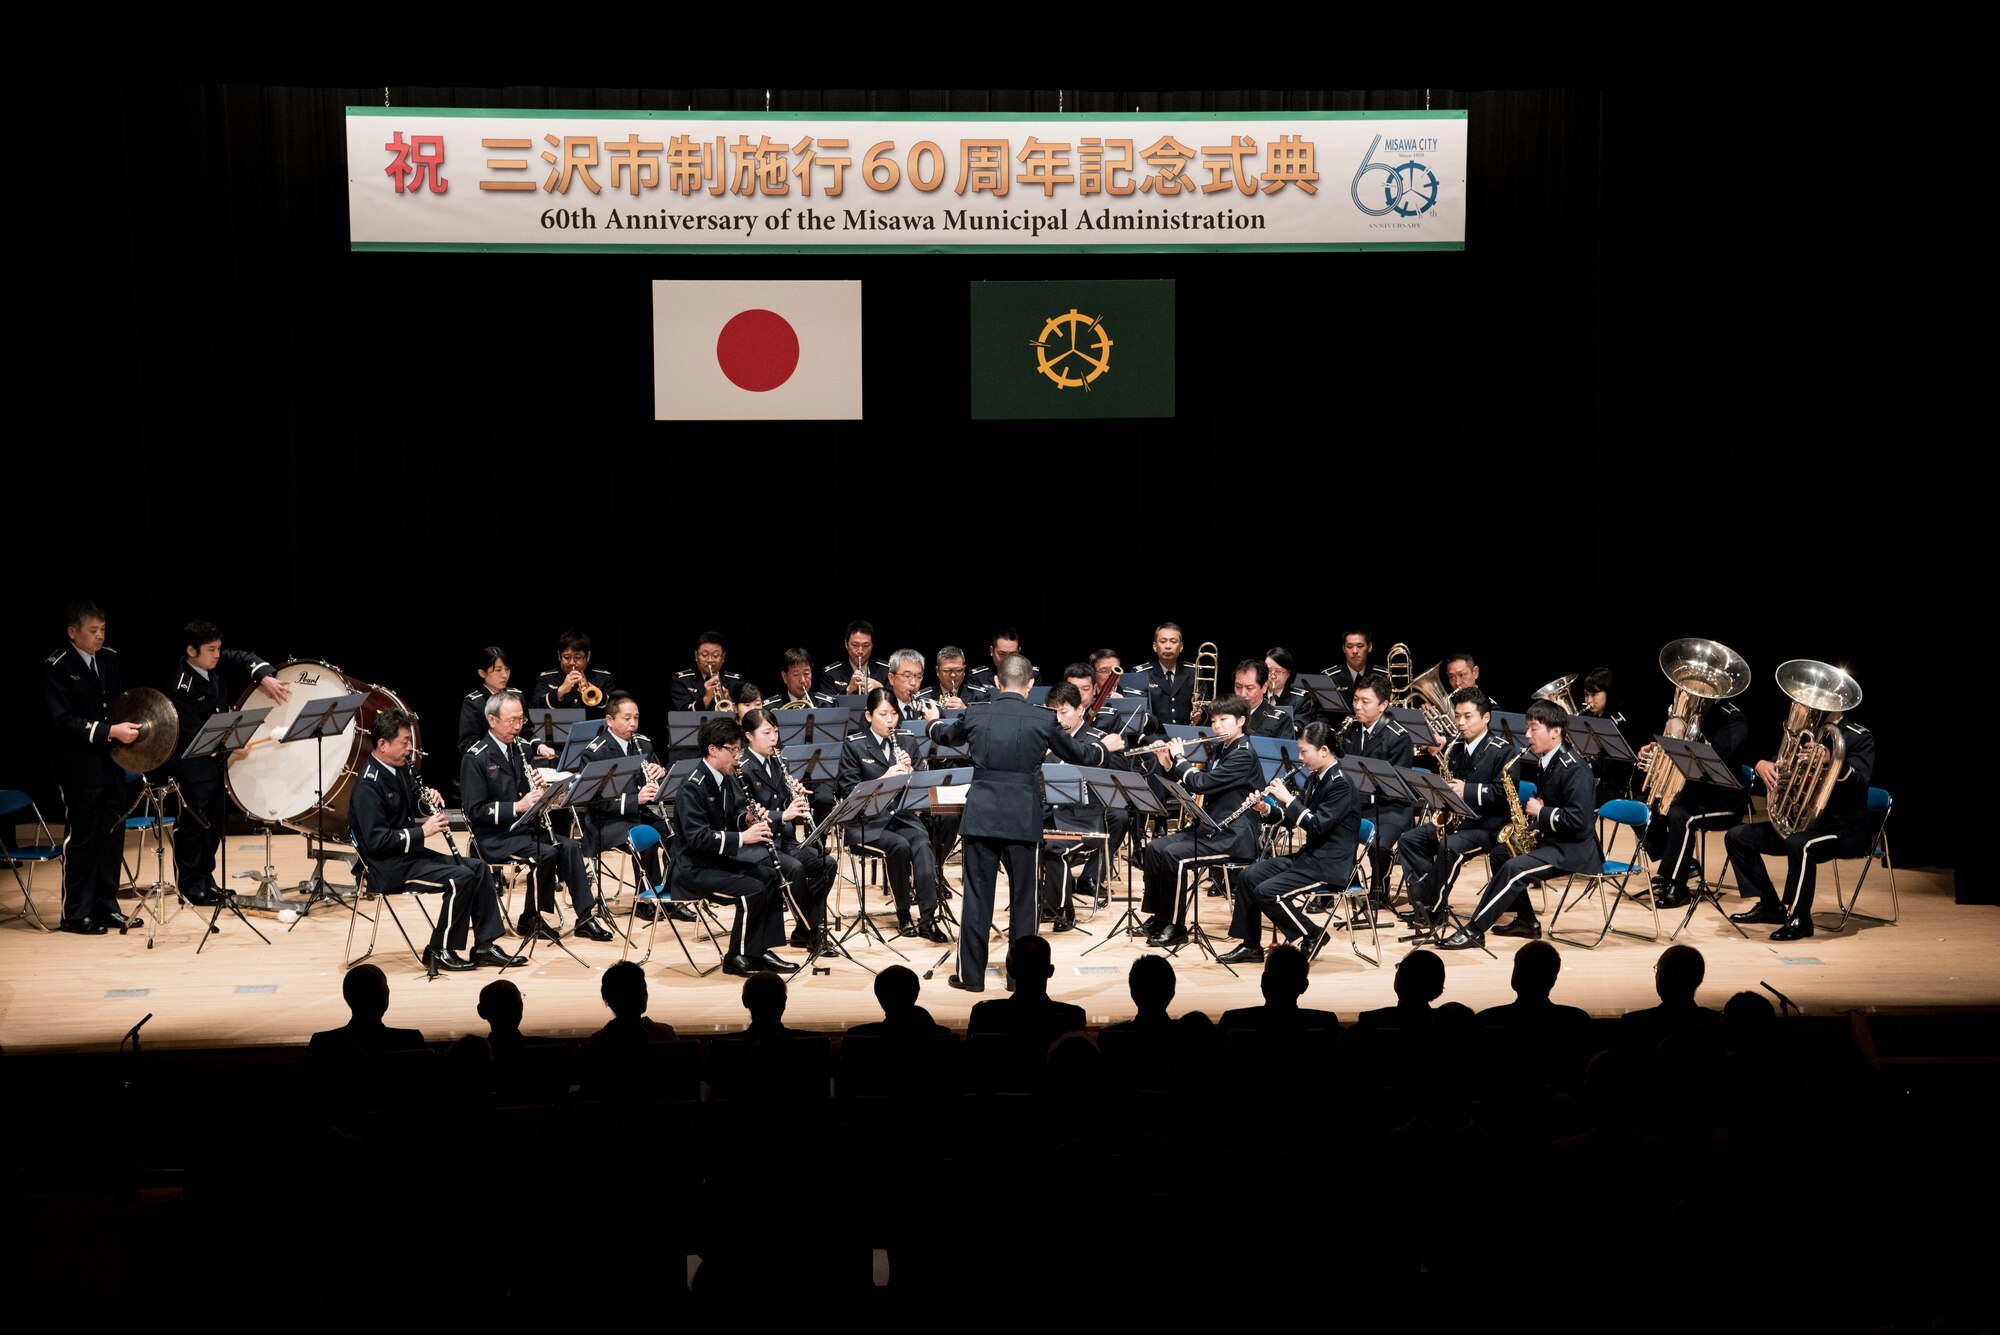 The Japan Air Self-Defense Force's Northern Air Band performs during the Misawa City 60th anniversary celebration ceremony held at the Misawa International Center in Misawa City, Japan, Sept. 1, 2018. The band performs at community engagements including Japan Day, American Day and Misawa Air Base changes of command which forges friendships and promotes unity. (U.S. Air Force photo by Airman 1st Class Collette Brooks)